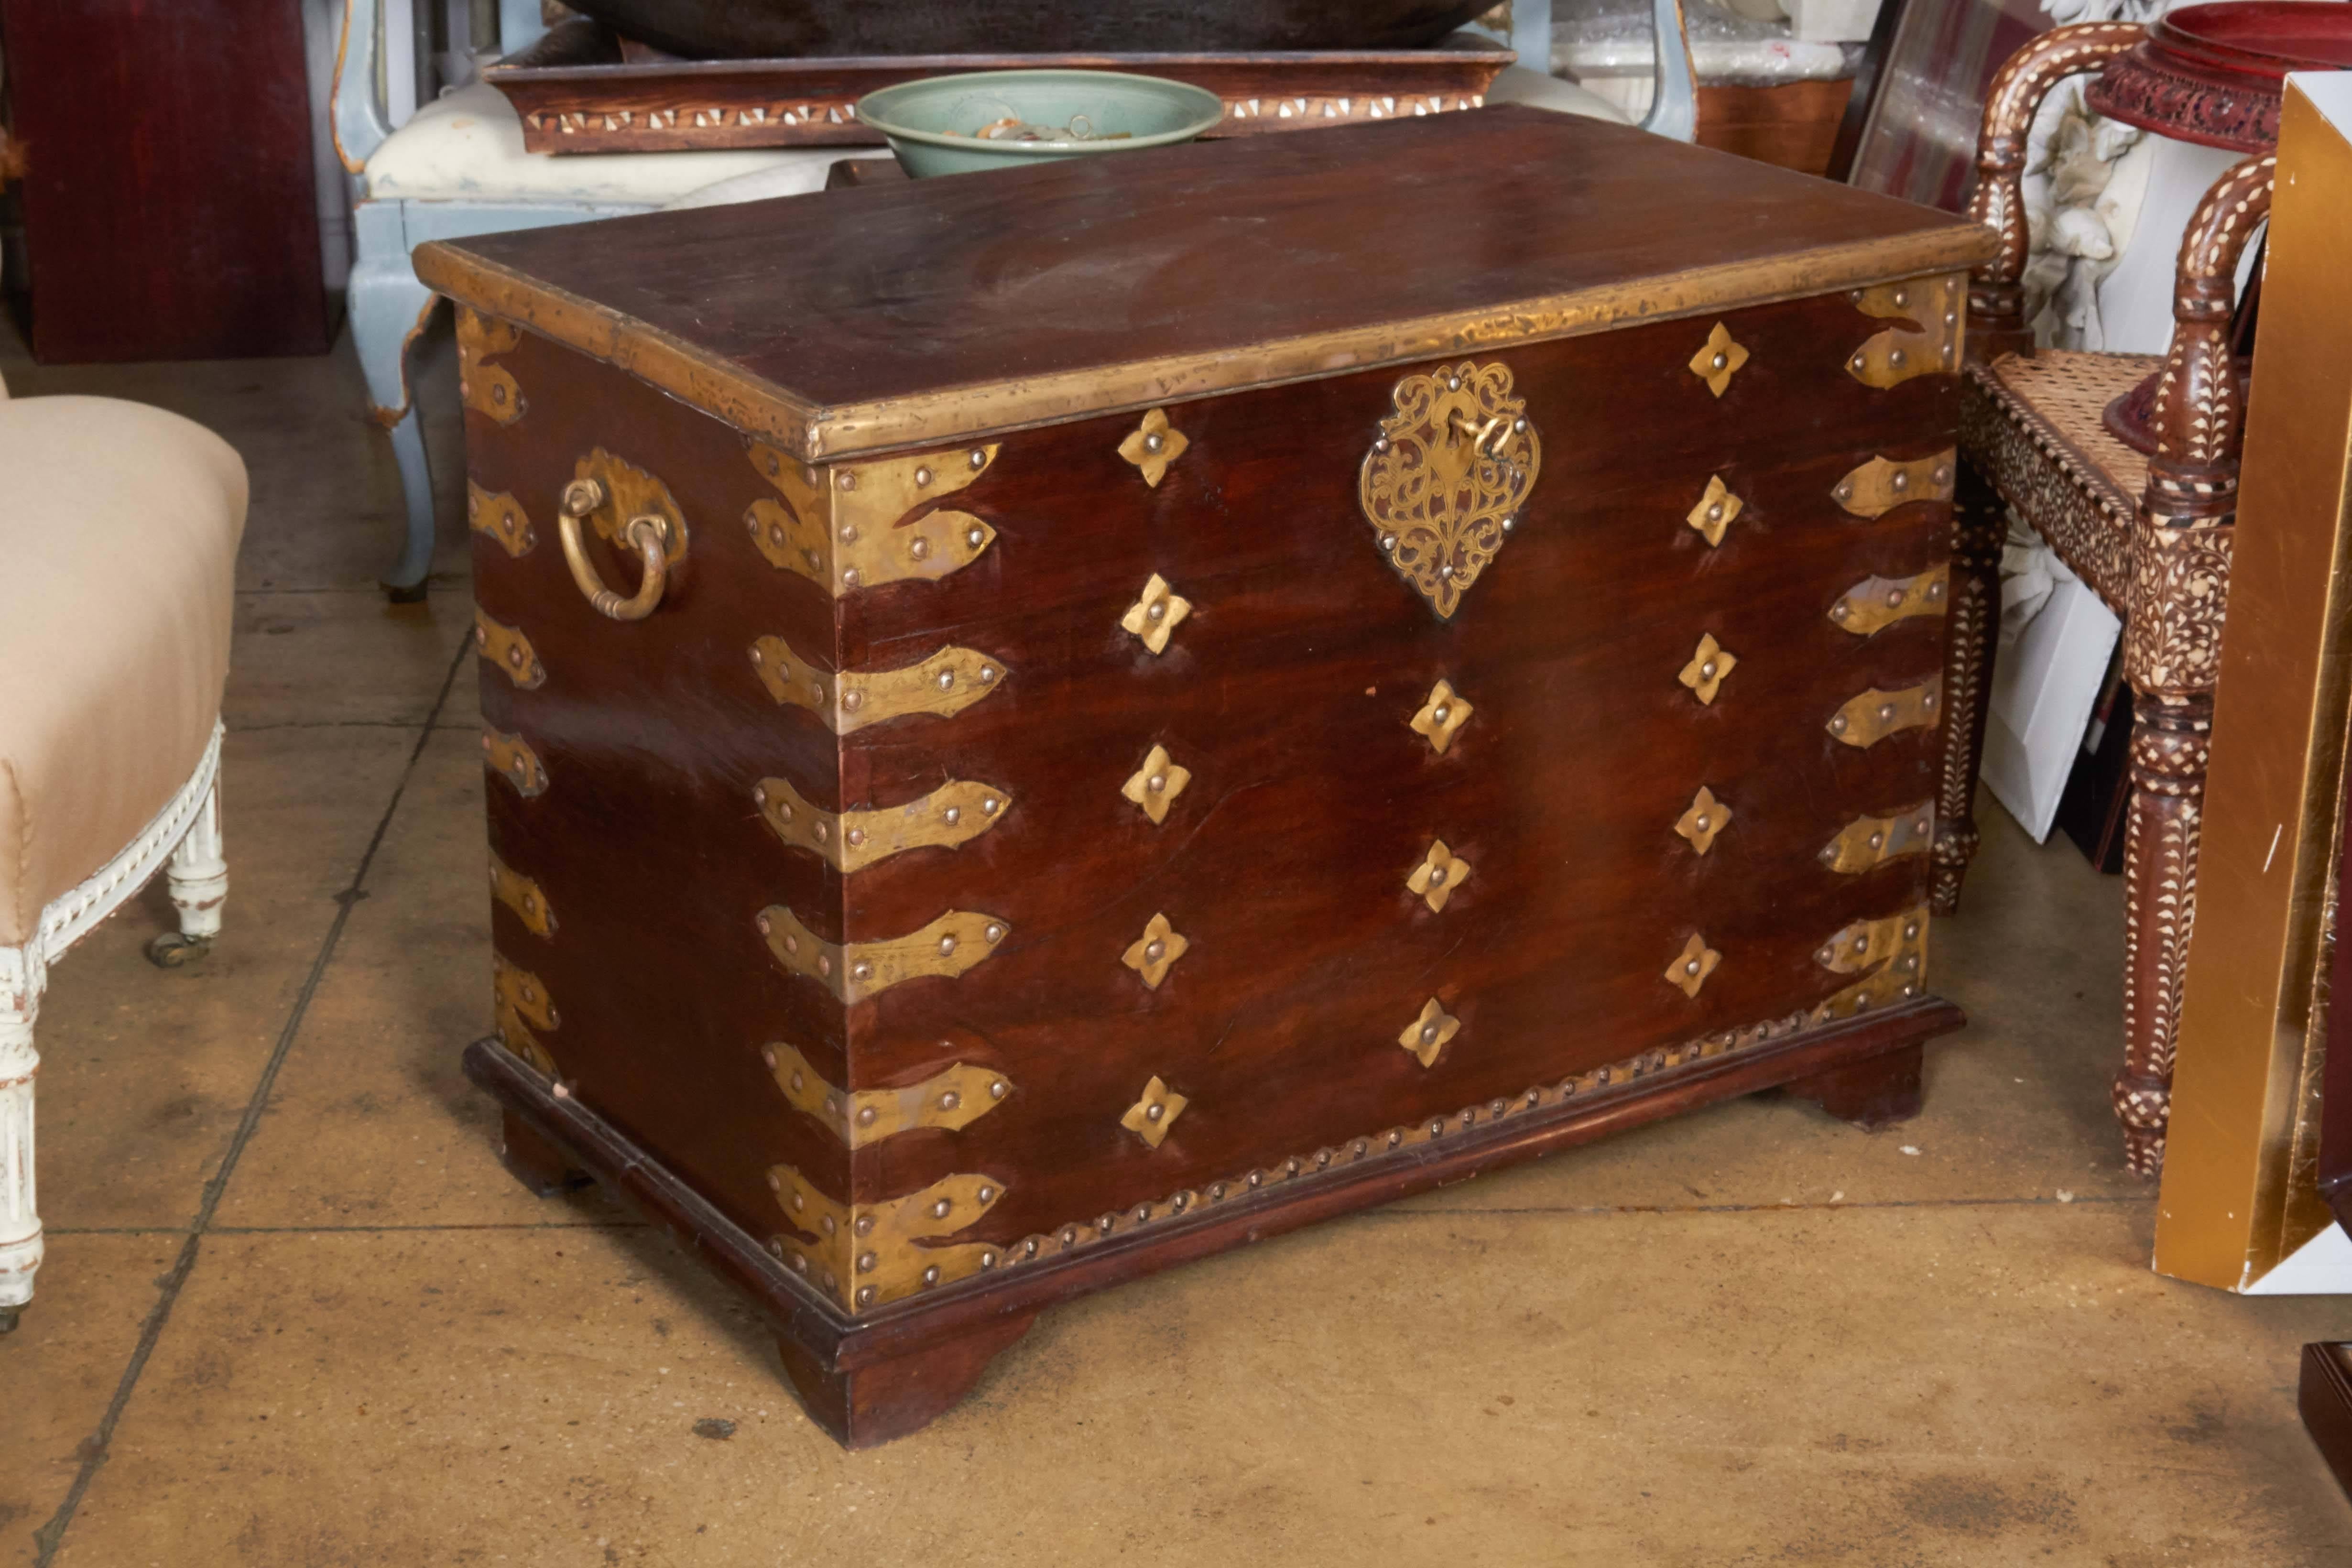 Appliqué Early 20th Century Polished Teak Trunk from Sumatra